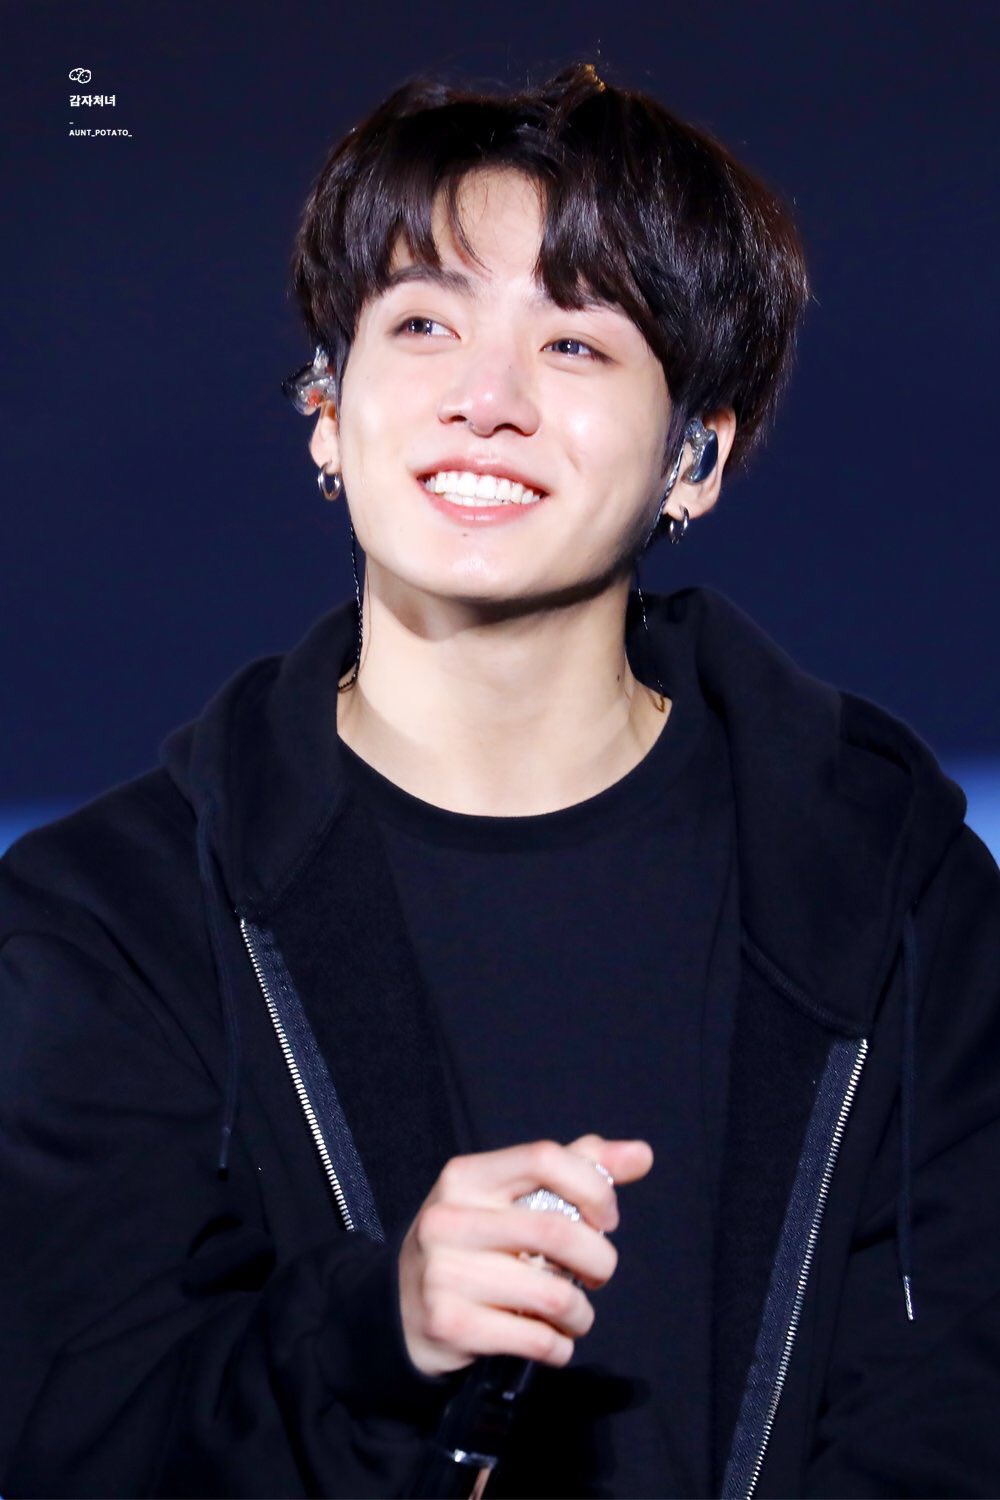 jungkook pics 🐰 on Twitter: "He is laughing, i am happy, he is crying i